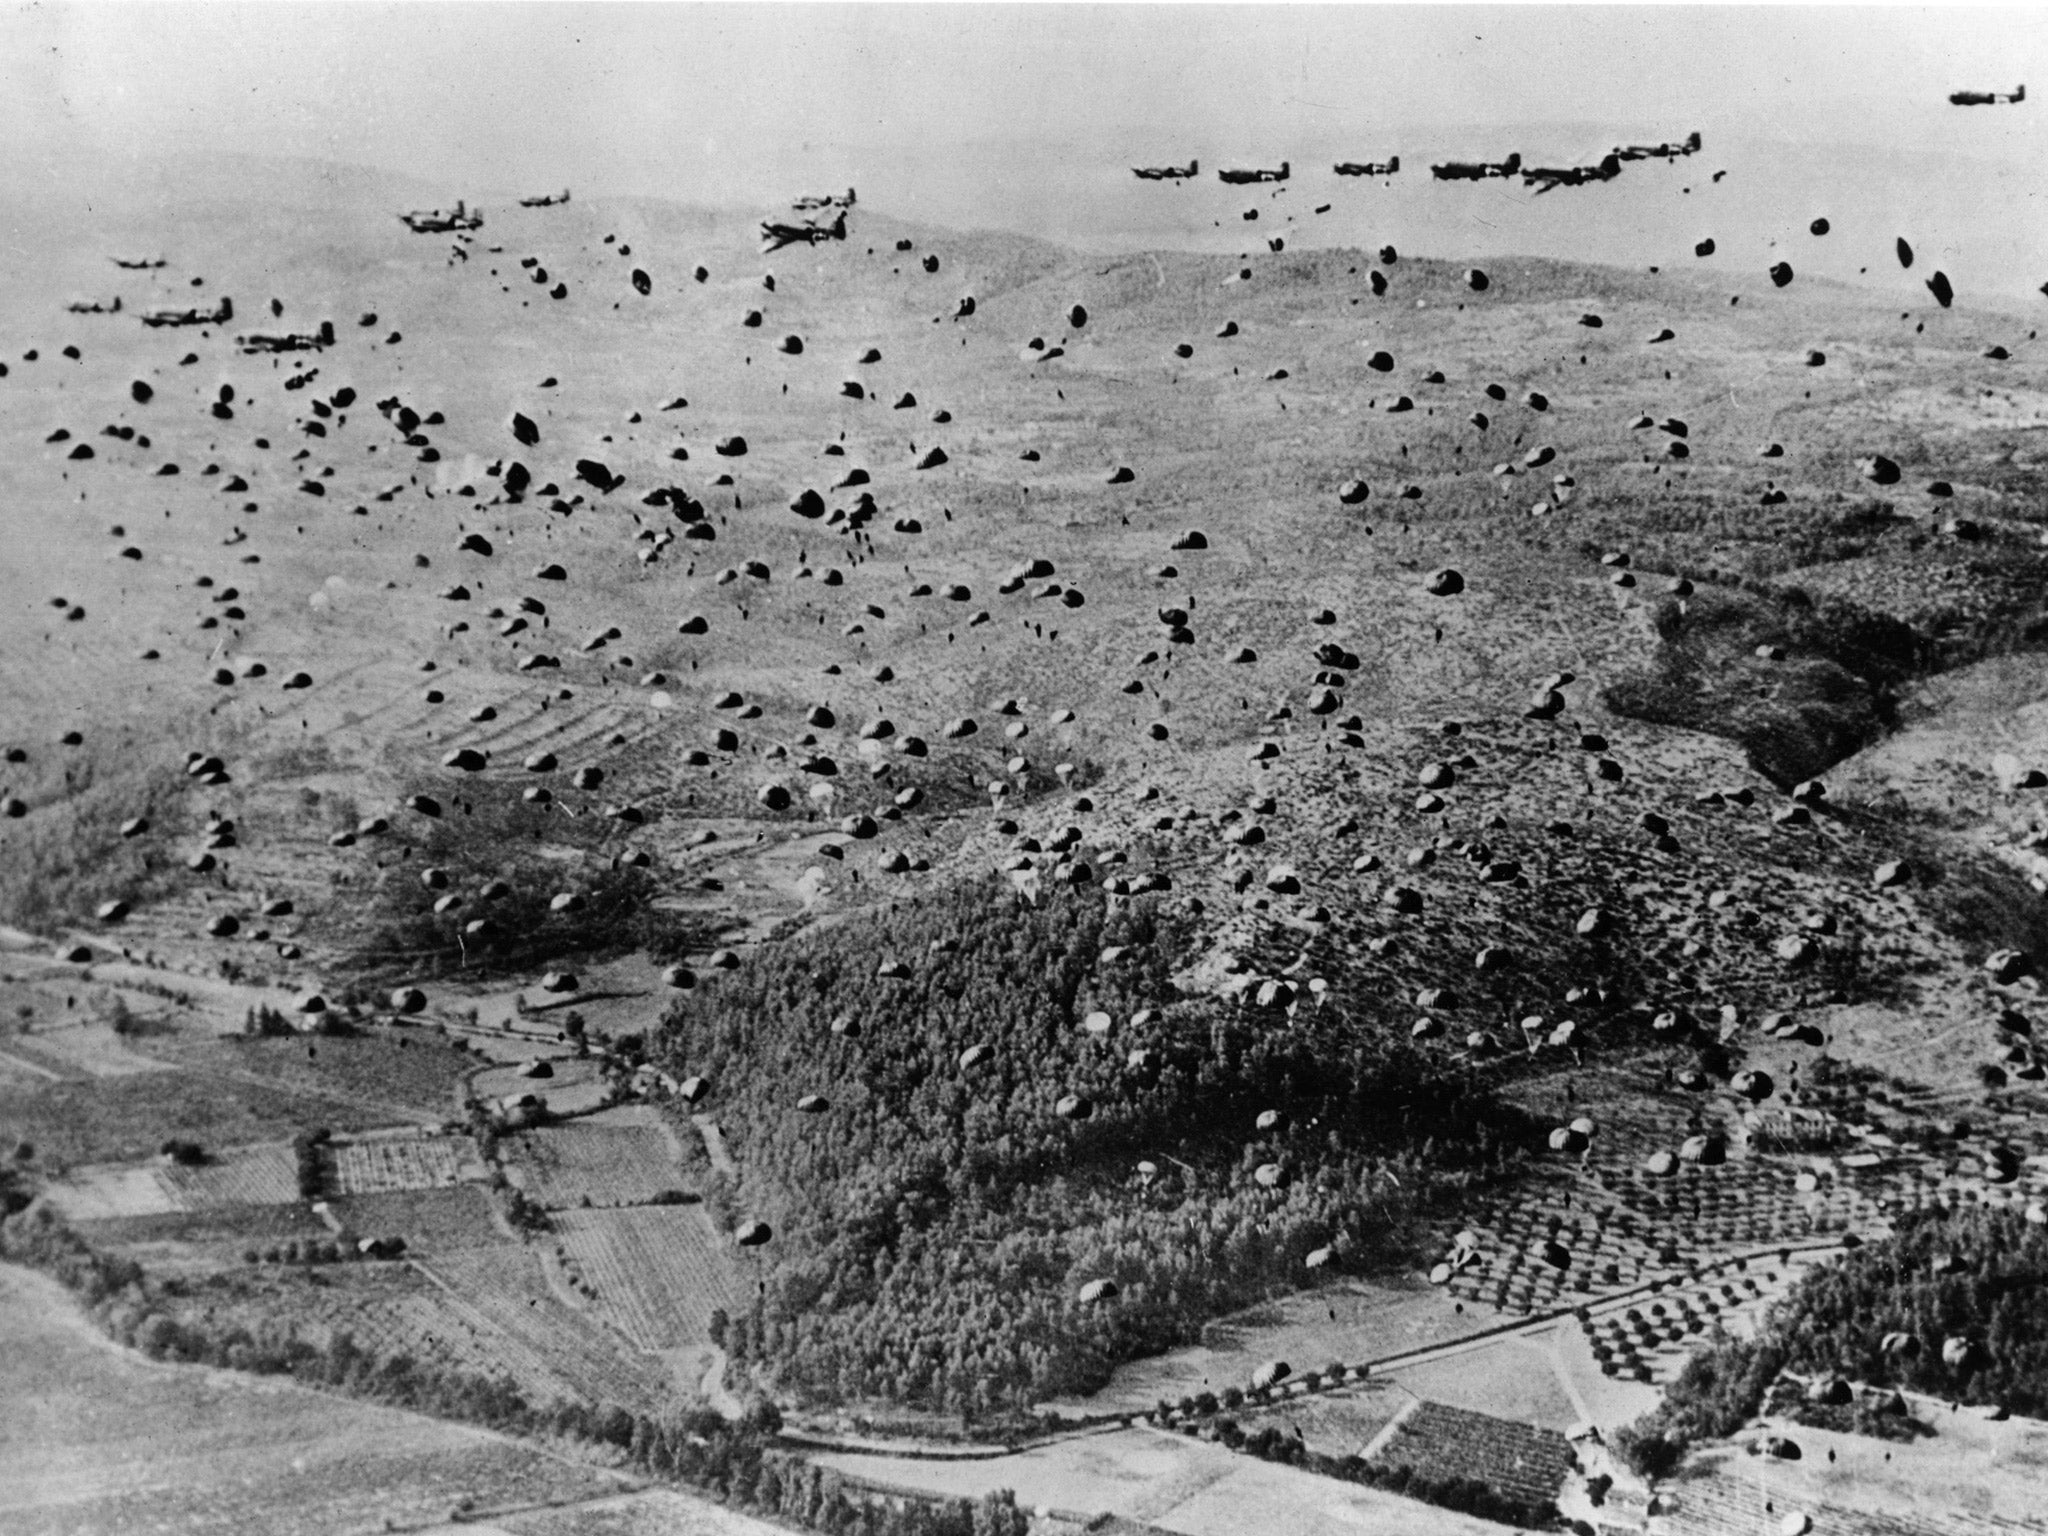 Allied soldiers and supplies fall from the sky over the beachhead between Marseilles and Nice, during the Allied Invasion of France